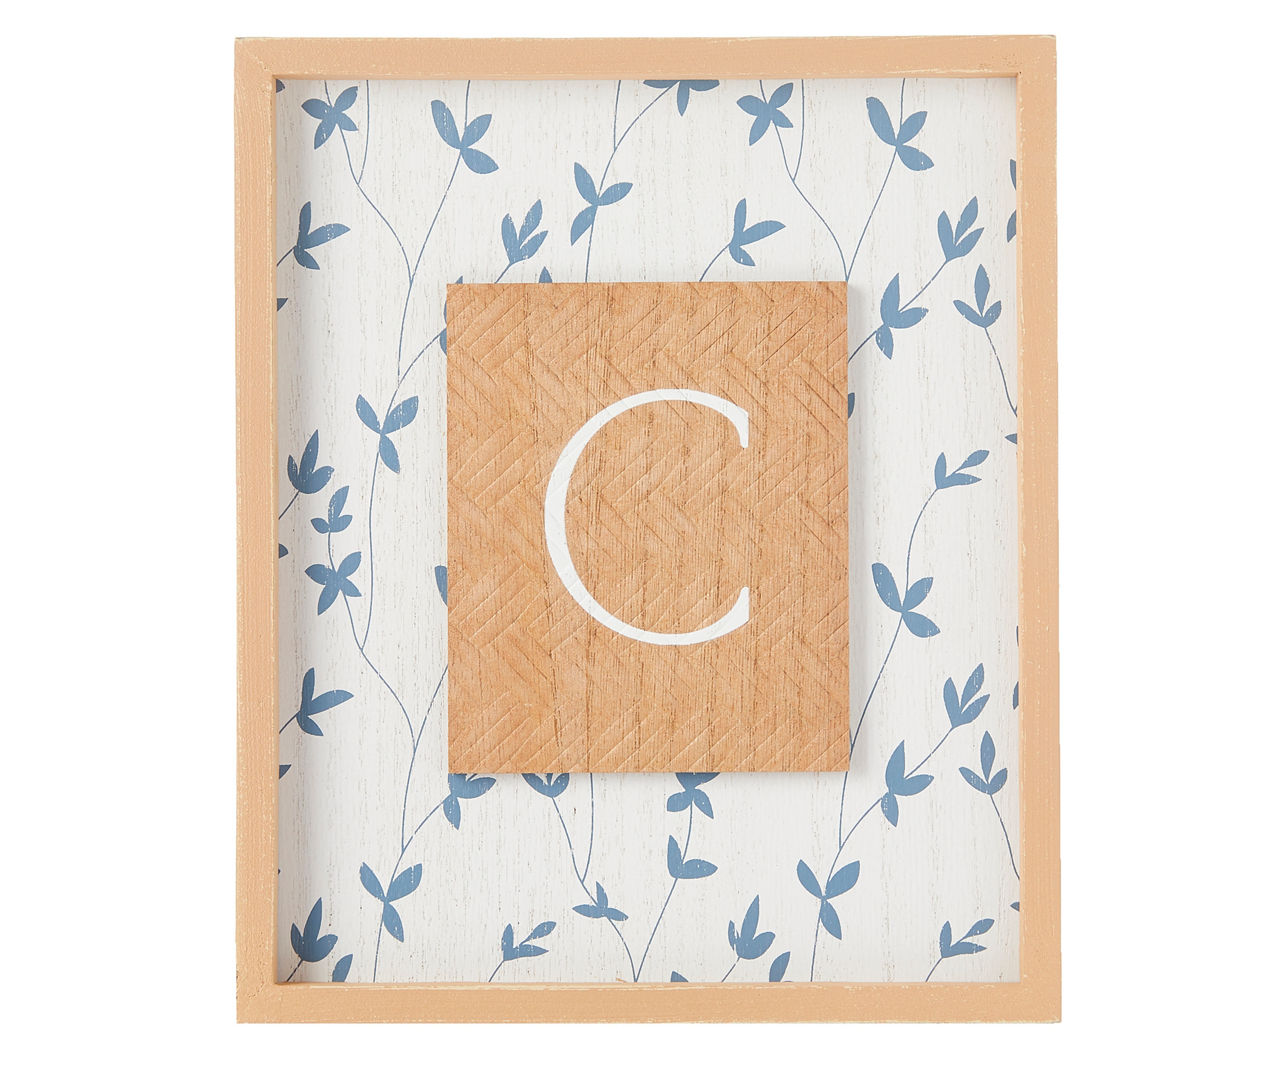 "C" White, Brown & Blue Floral Tabletop Plaque With Easel